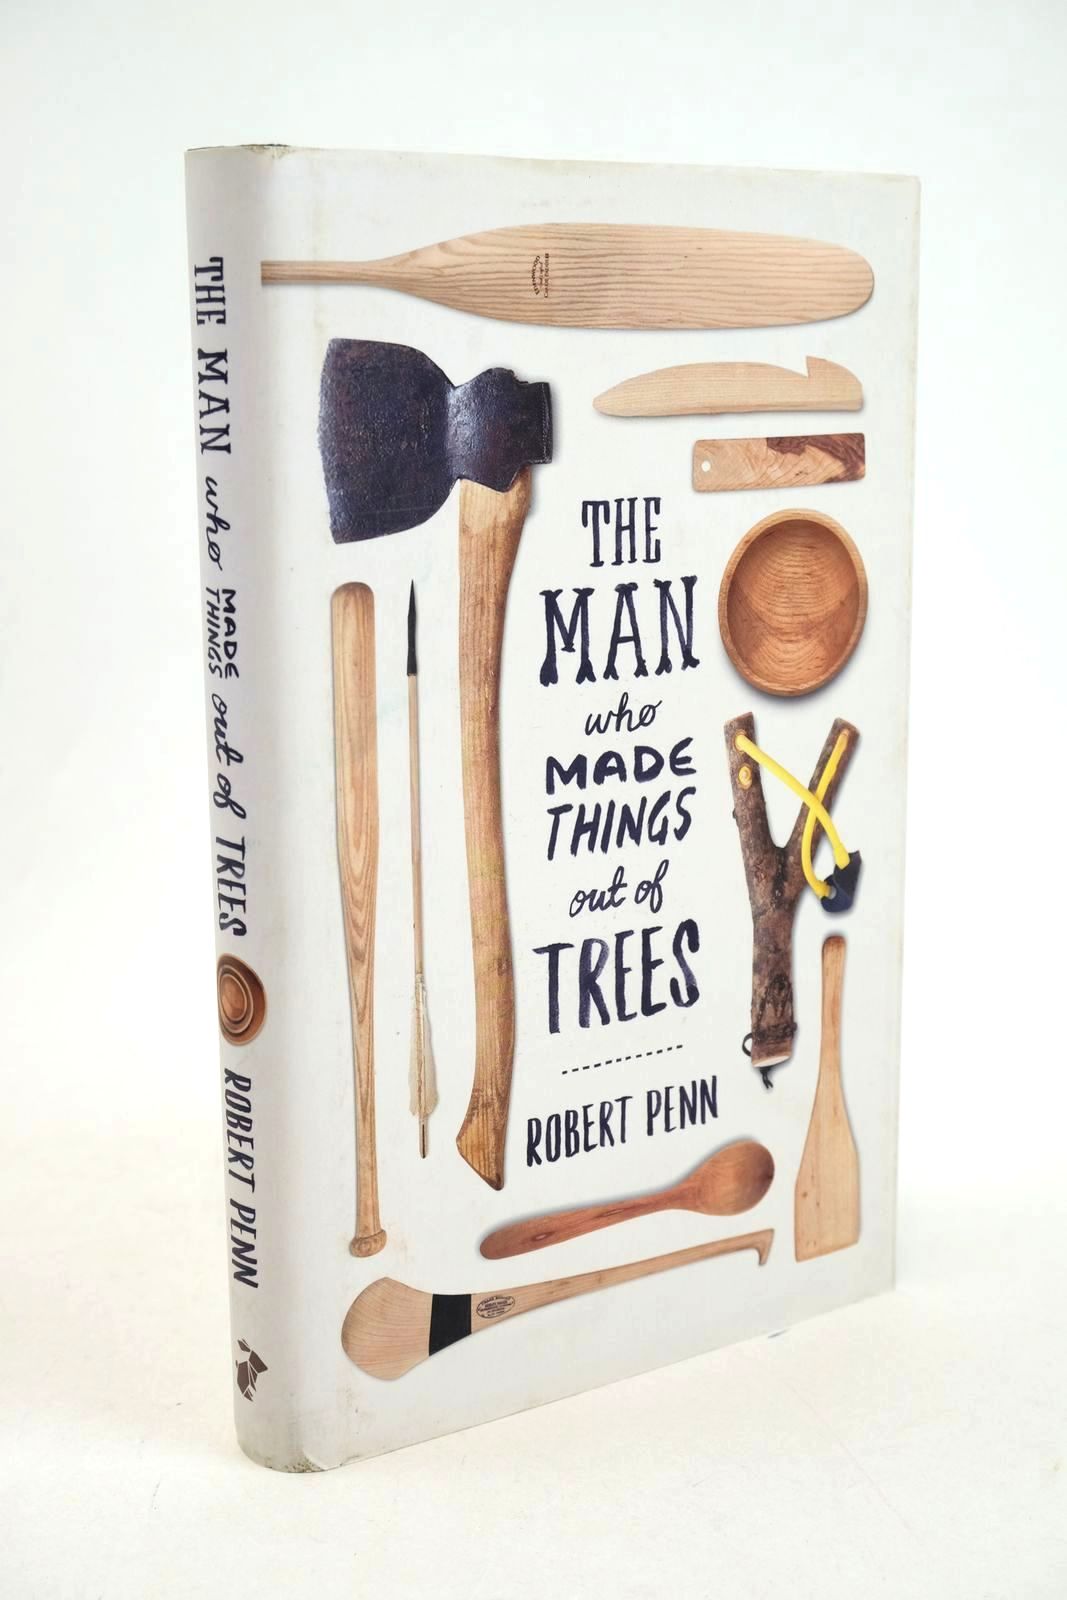 Photo of THE MAN WHO MADE THINGS OUT OF TREES written by Penn, Robert published by Particular Books (STOCK CODE: 1327926)  for sale by Stella & Rose's Books